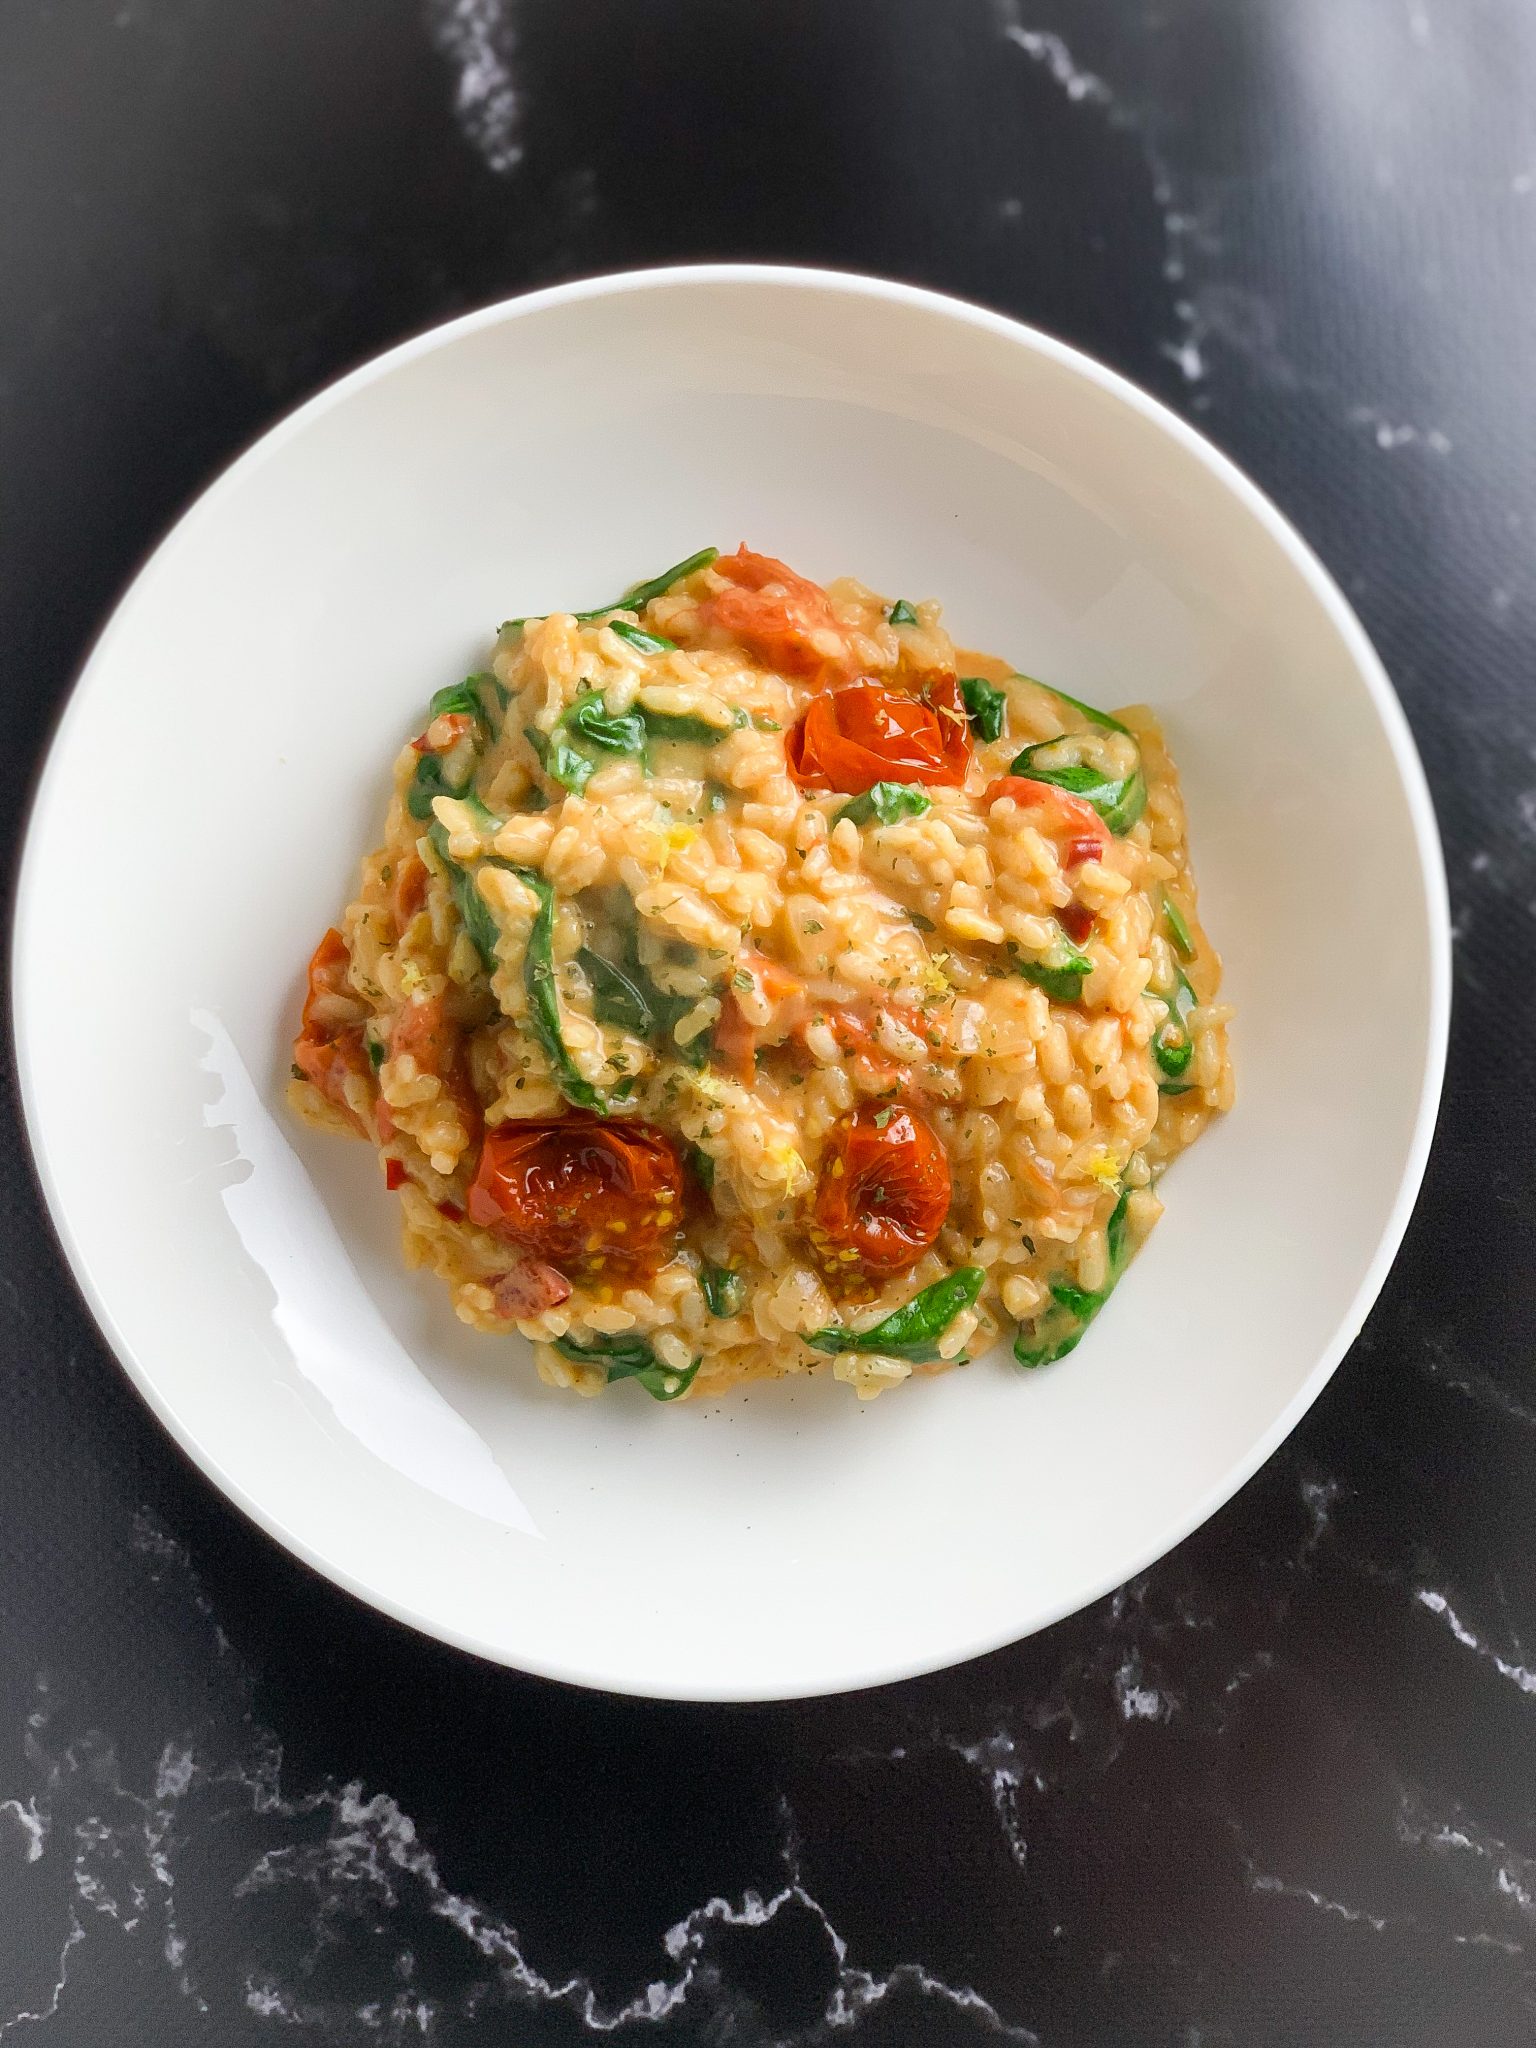 Spinach and Tomato Risotto - The Slimmer Kitchen